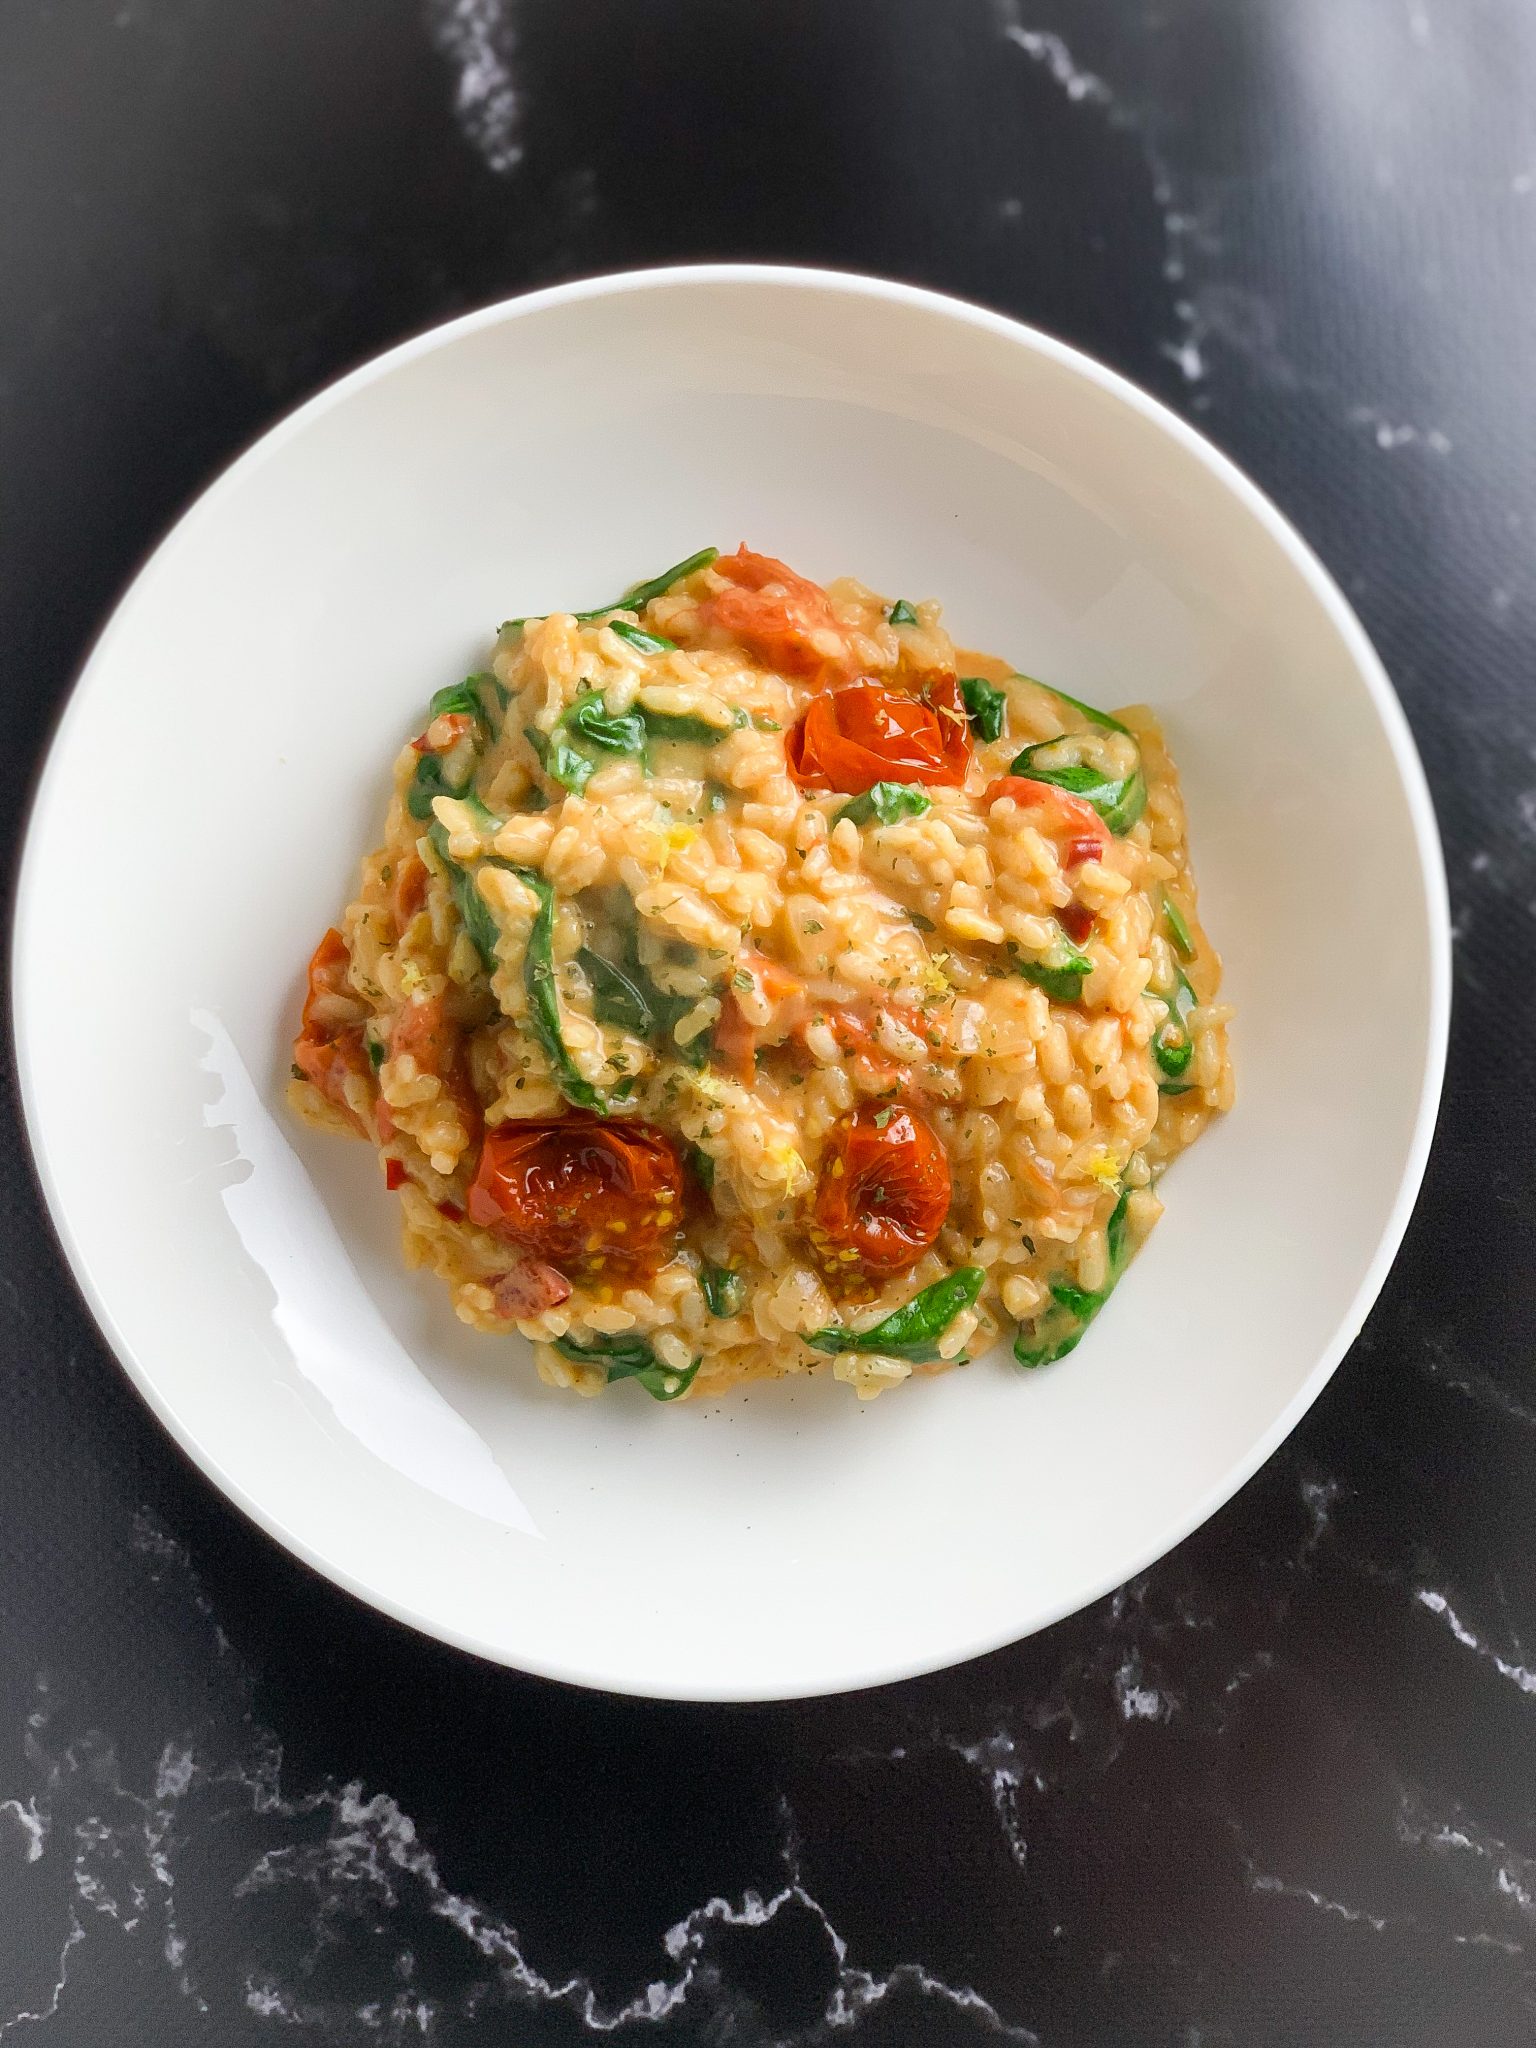 Spinach and Tomato Risotto - The Slimmer Kitchen